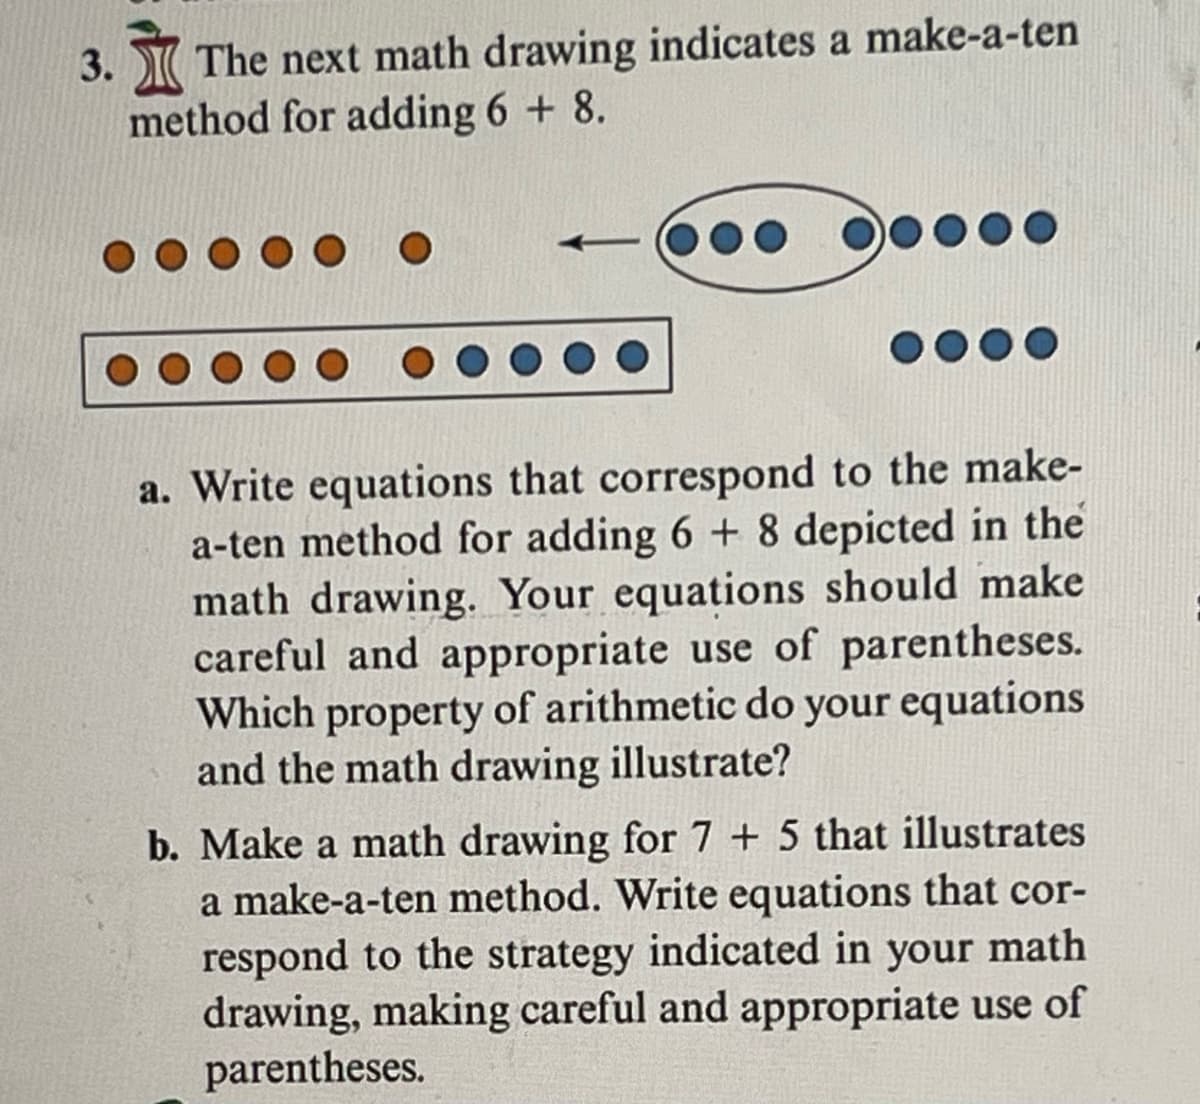 3. The next math drawing indicates a make-a-ten
method for adding 6 + 8.
....
0000
a. Write equations that correspond to the make-
a-ten method for adding 6 + 8 depicted in the
math drawing. Your equations should make
careful and appropriate use of parentheses.
Which property of arithmetic do your equations
and the math drawing illustrate?
b. Make a math drawing for 7 + 5 that illustrates
a make-a-ten method. Write equations that cor-
respond to the strategy indicated in your math
drawing, making careful and appropriate use of
parentheses.